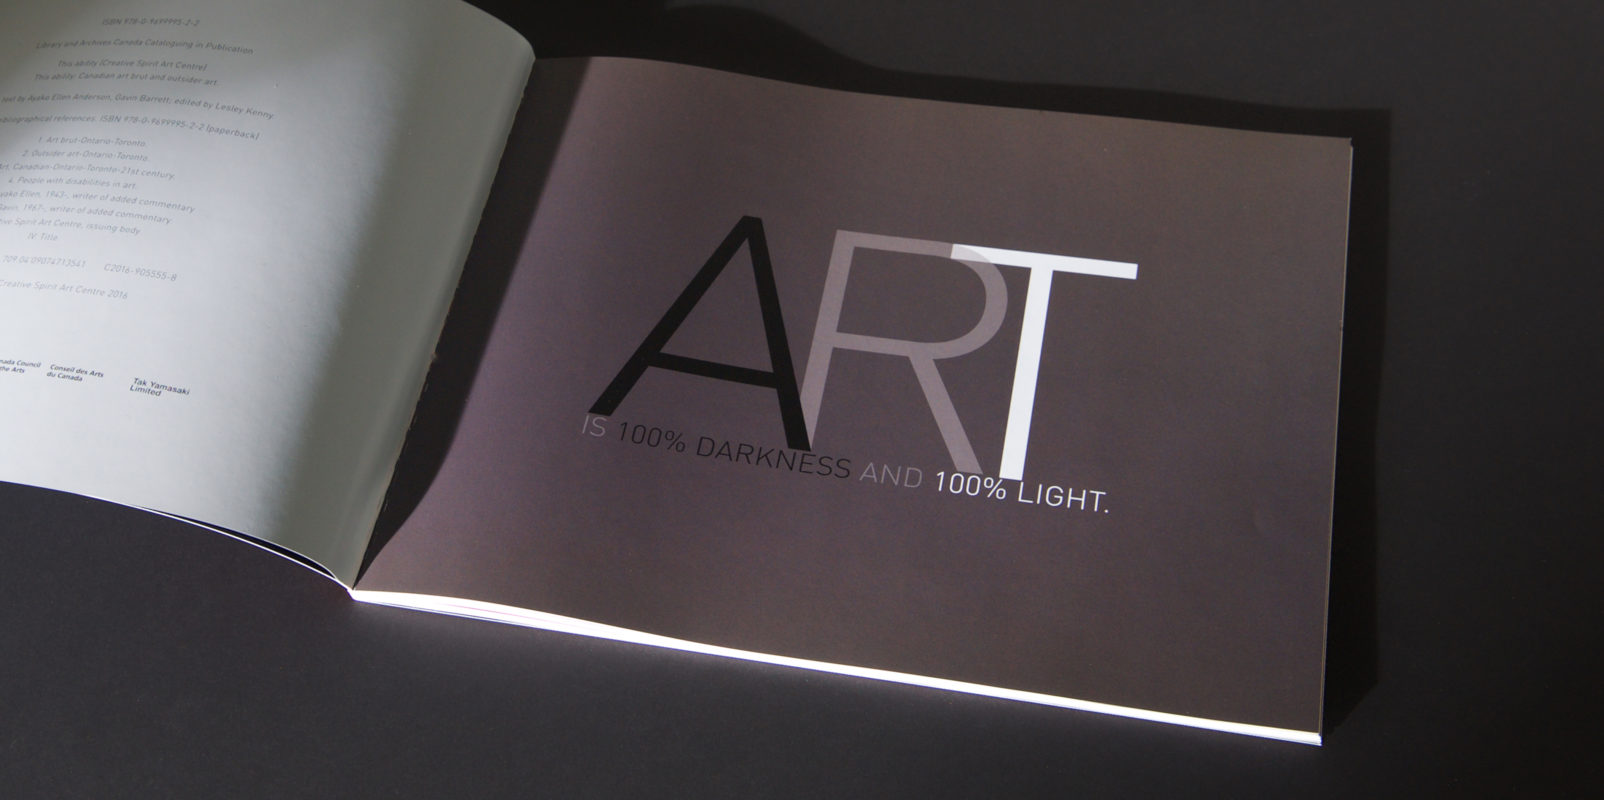 ThisAbility_darknesslight is typographic art of the line "Art is 100% darkness and 100% light."